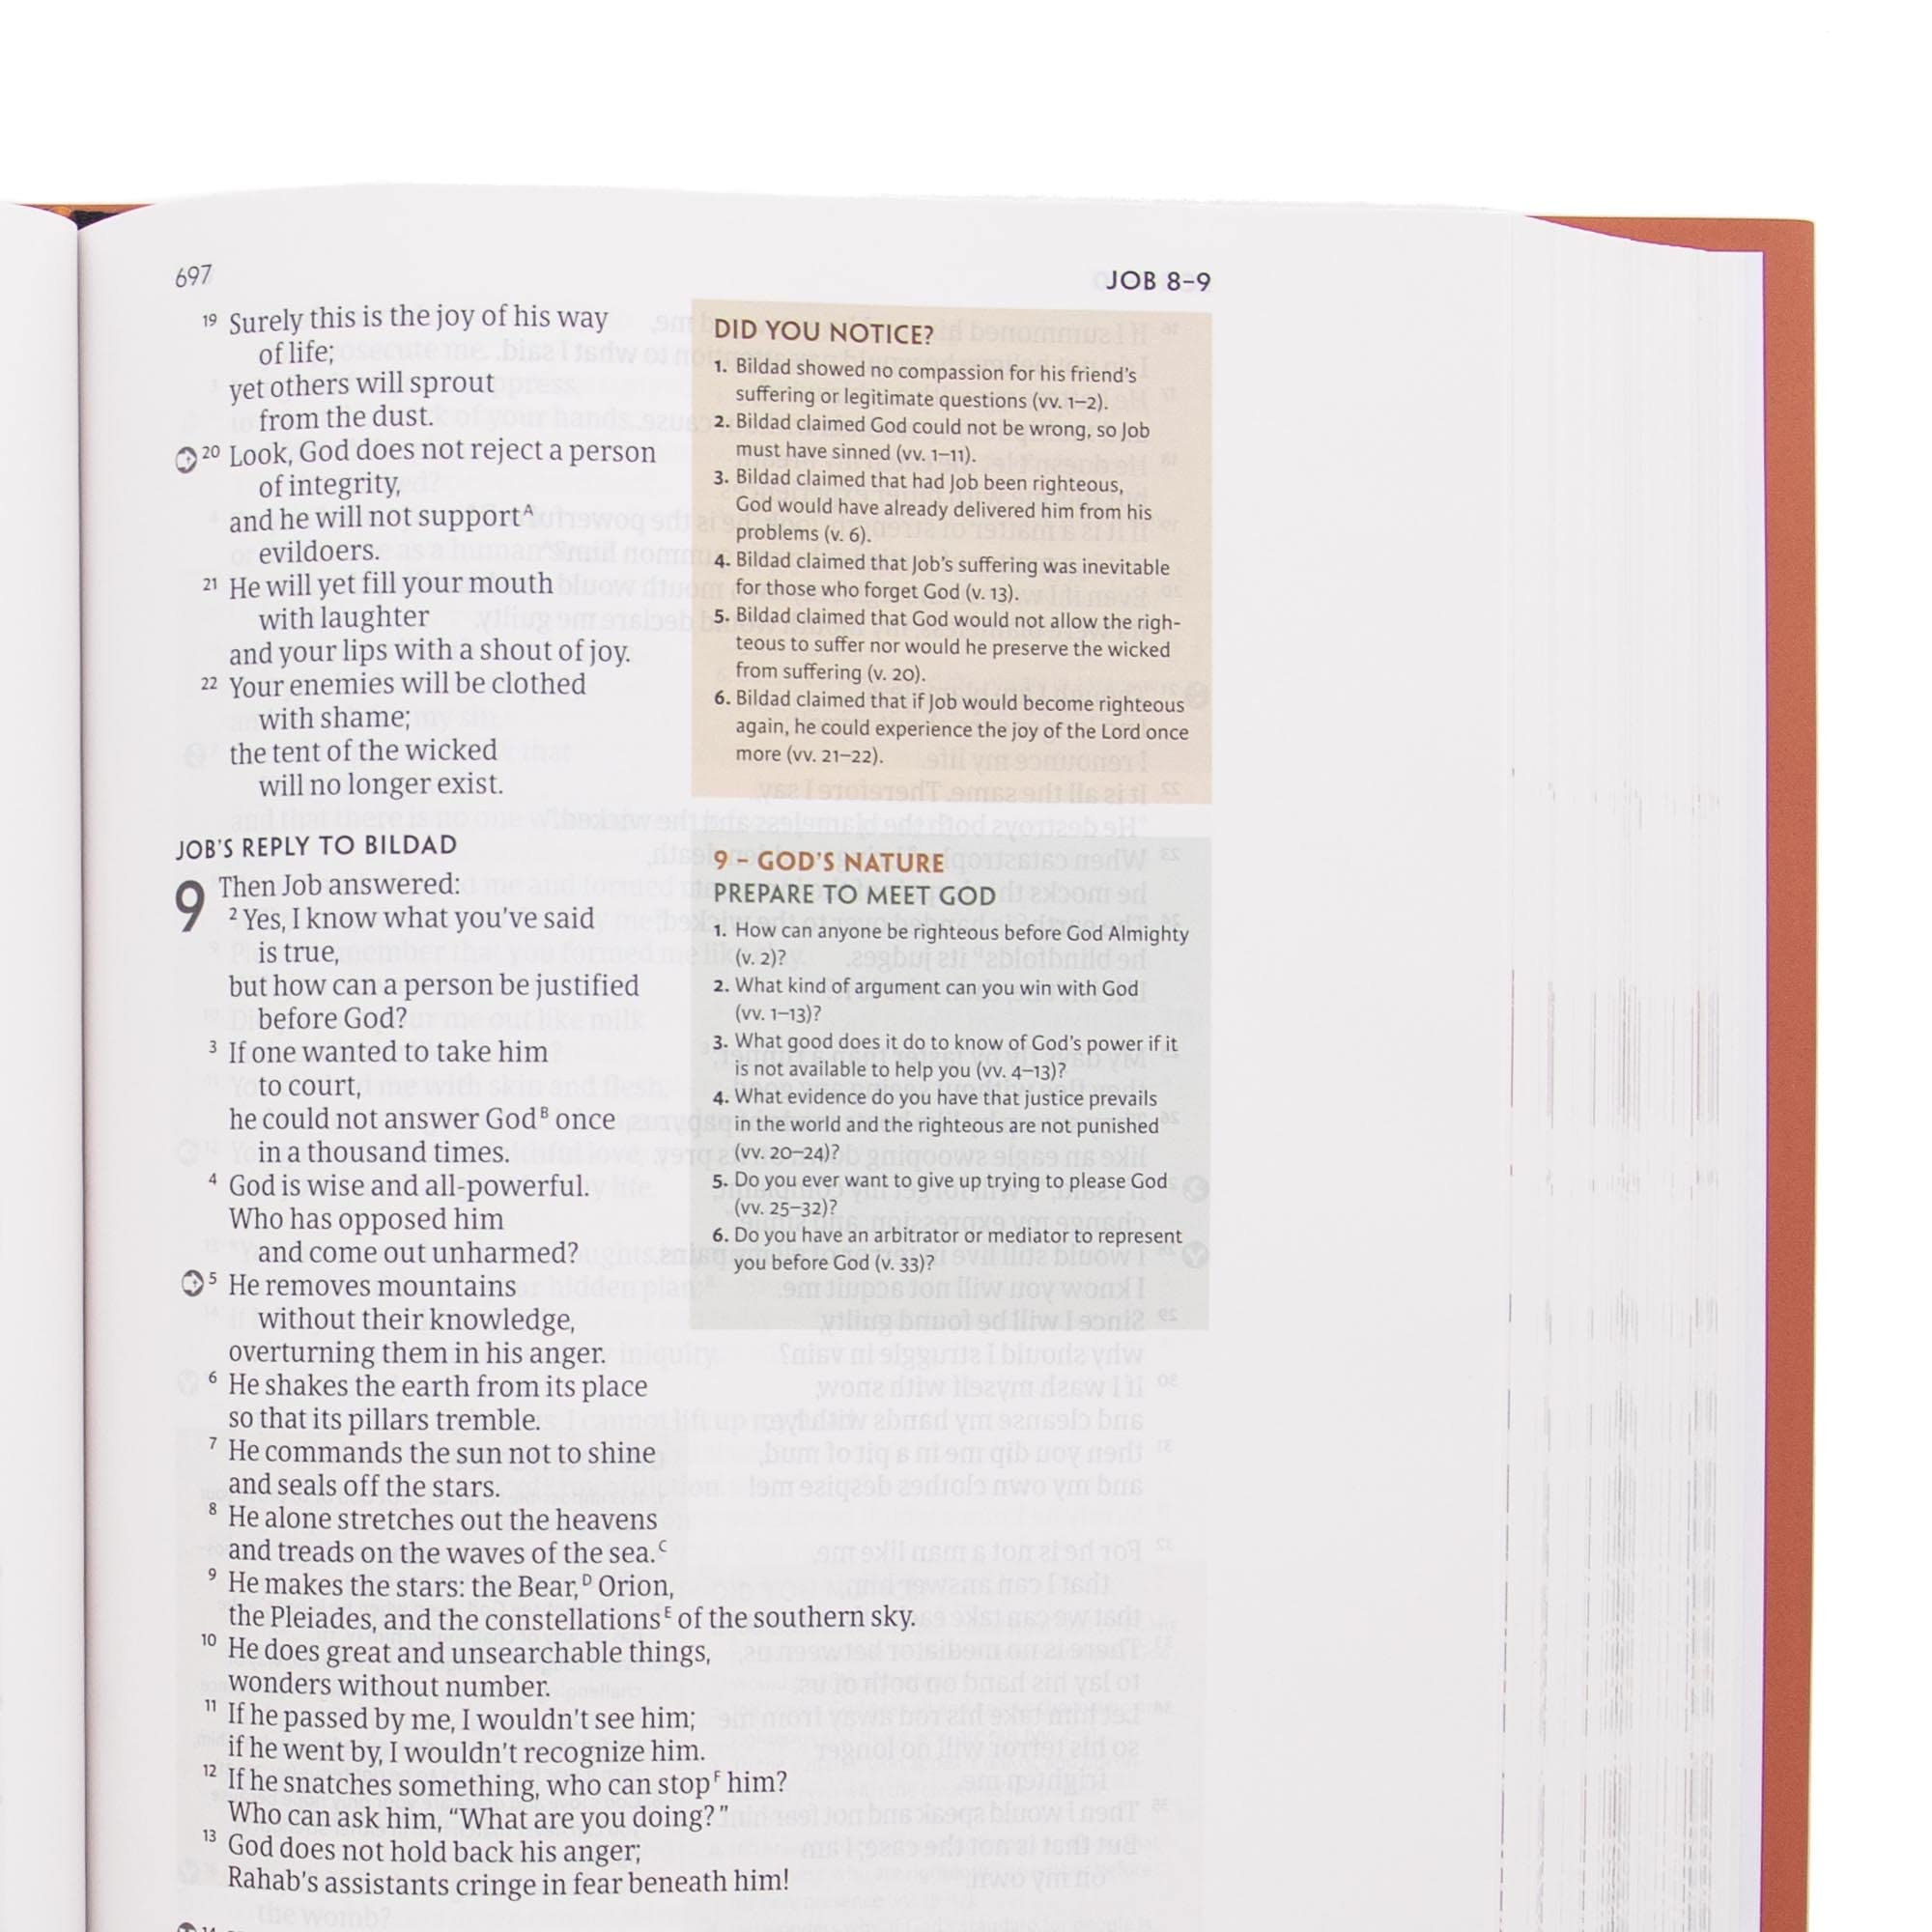 CSB Experiencing God Bible, Hardcover, Jacketed, Full-Color Design, Articles, Character Profiles, Chapter Questions, Key Verse Icons, Full-Color Maps, Easy-to-Read Bible Serif Type